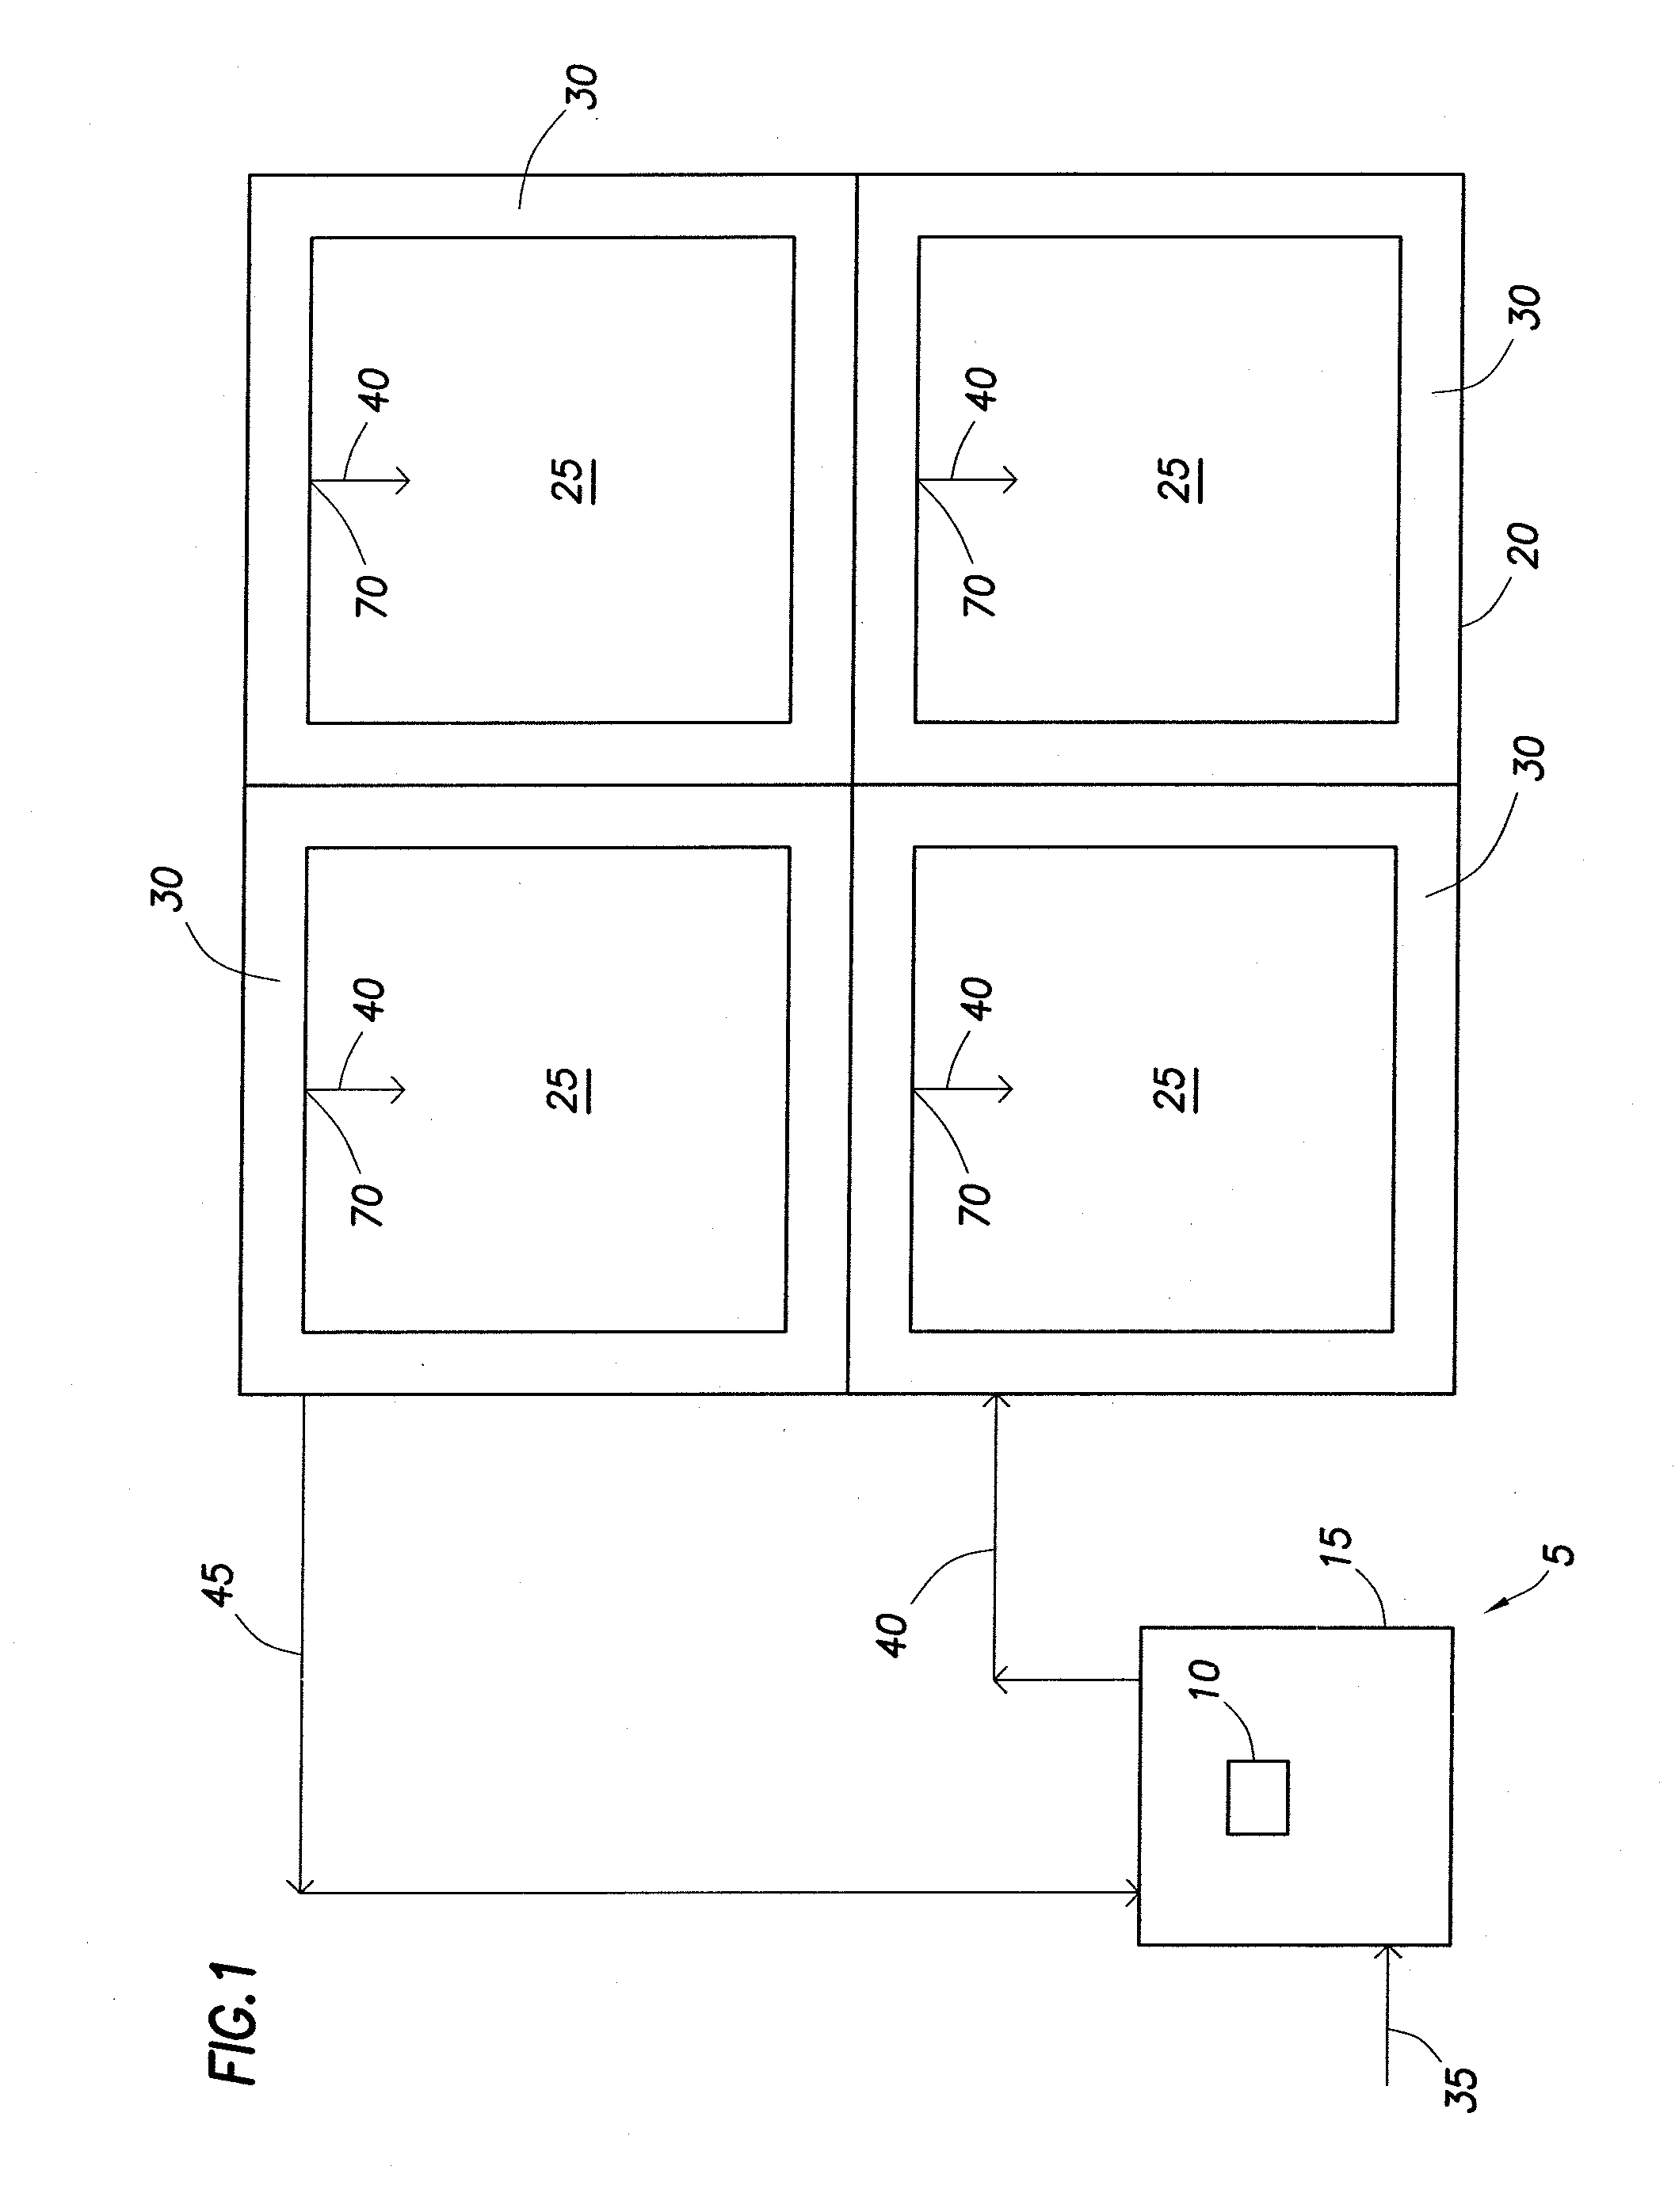 Method and System for Controlling Microbiological Contamination in Buildings